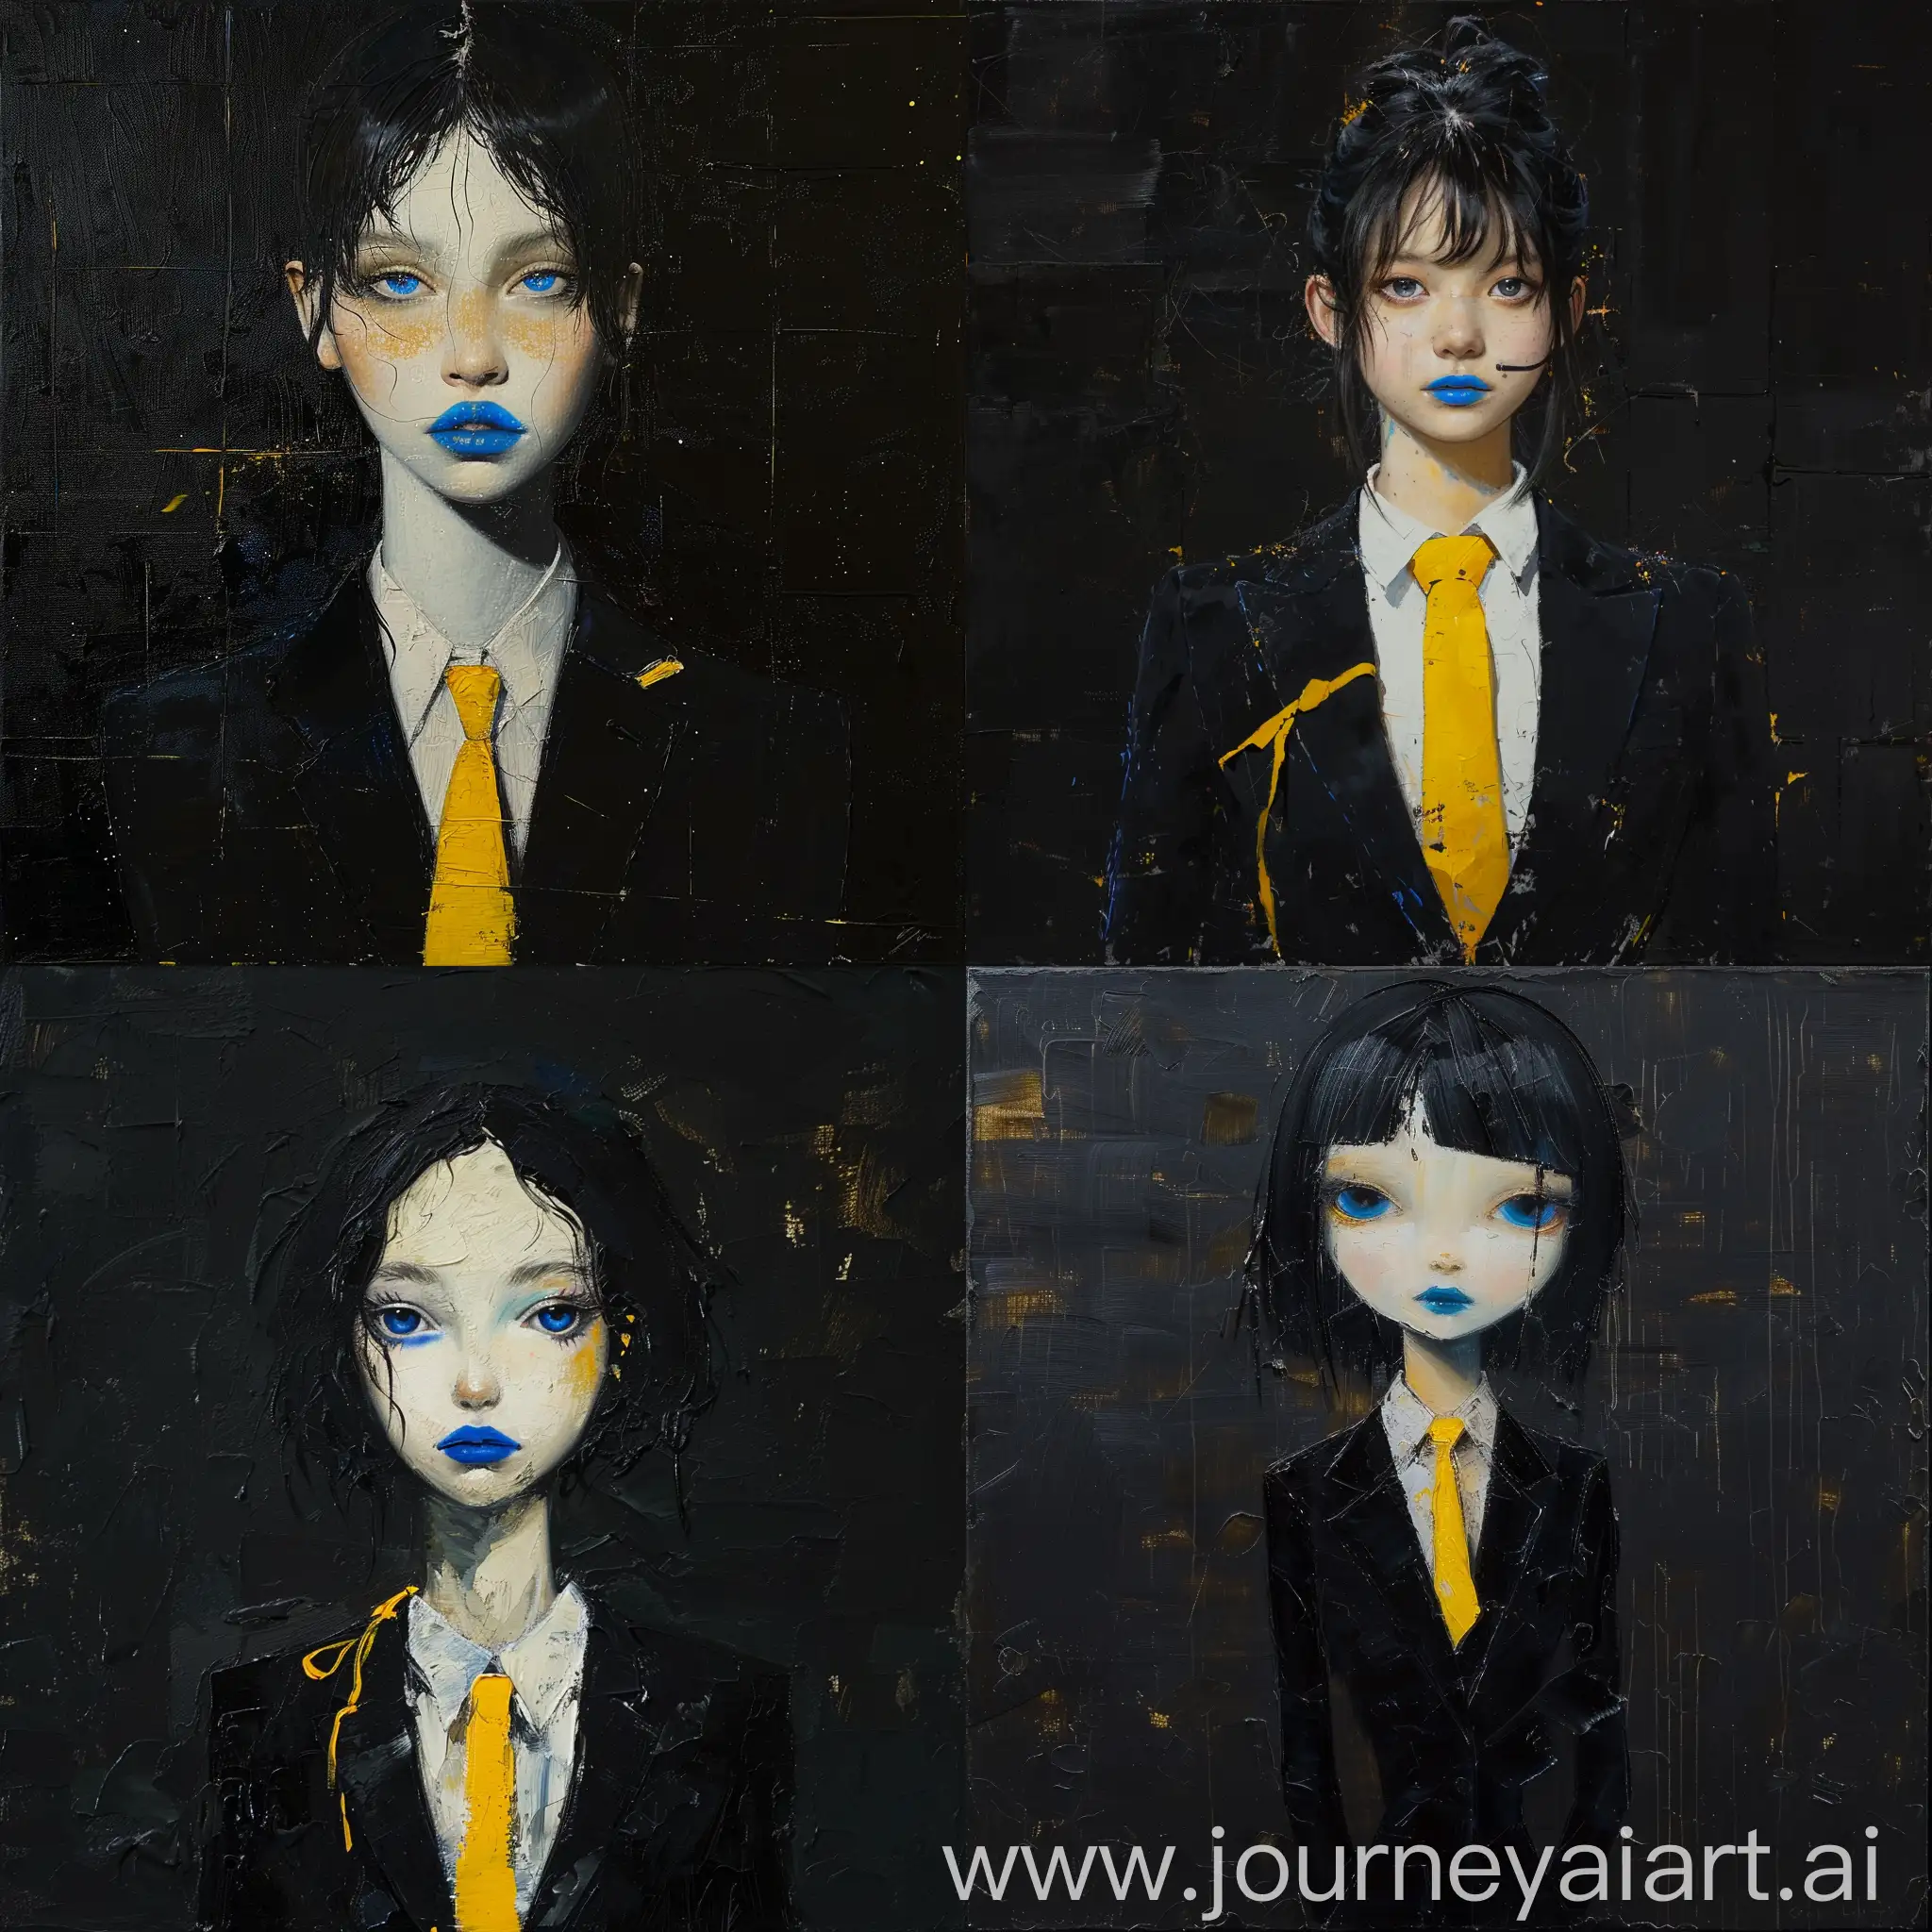 painting  A beautiful girl with black hair, a square, blue lips, stands in a classic black suit, yellow tie painted in oil on a textured canvas, set against a stark black background, striking contrast, fluidity and grace of the traditional figure